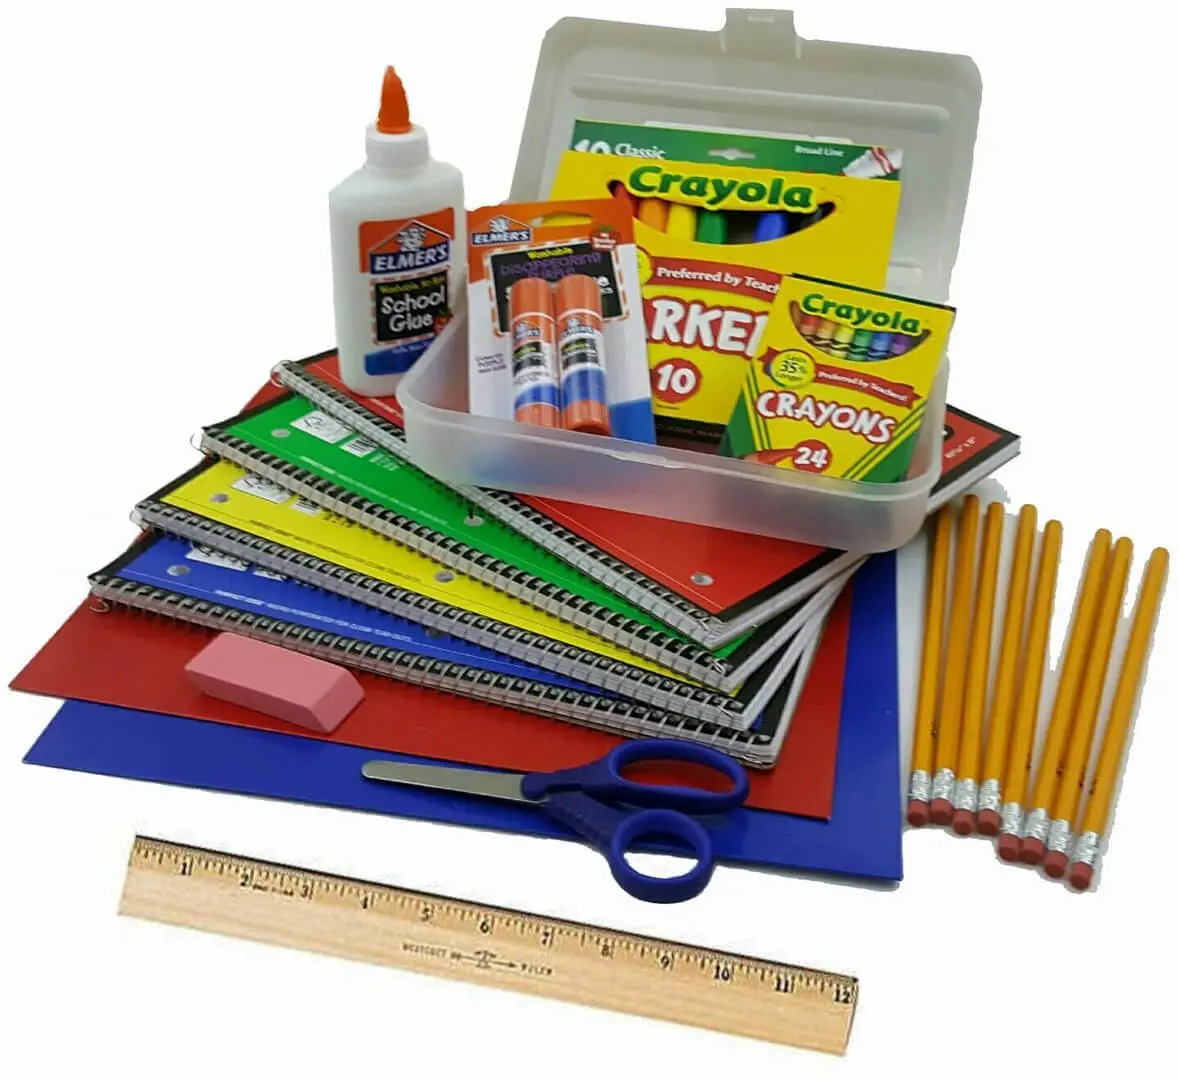 A box of school supplies sitting on top of some books.